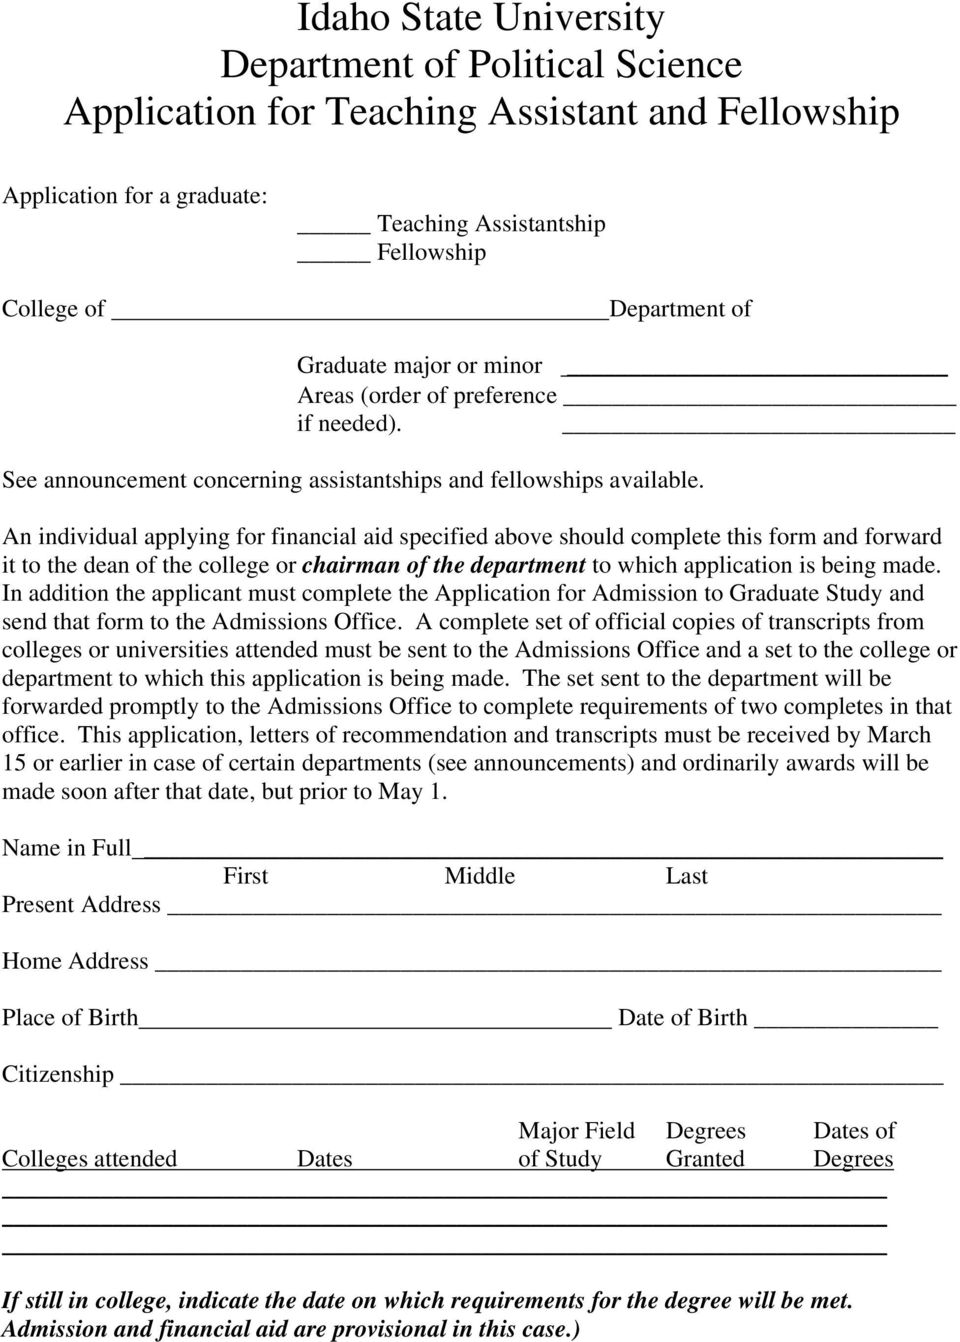 An individual applying for financial aid specified above should complete this form and forward it to the dean of the college or chairman of the department to which application is being made.